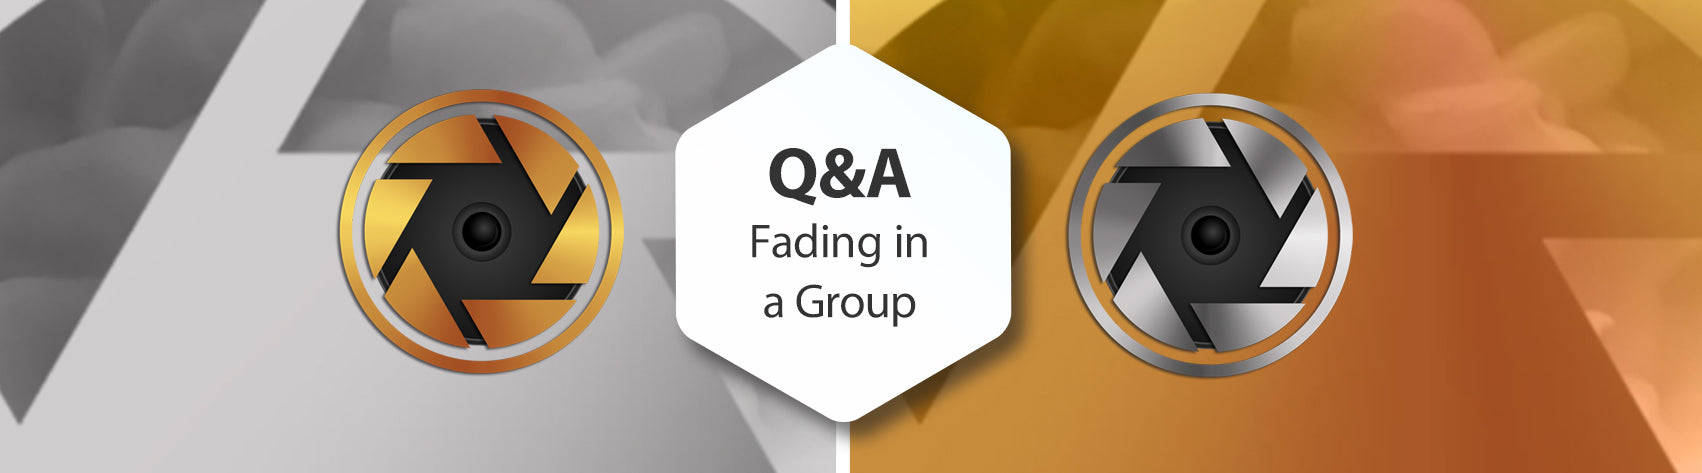 Q&A - Fading in a Group